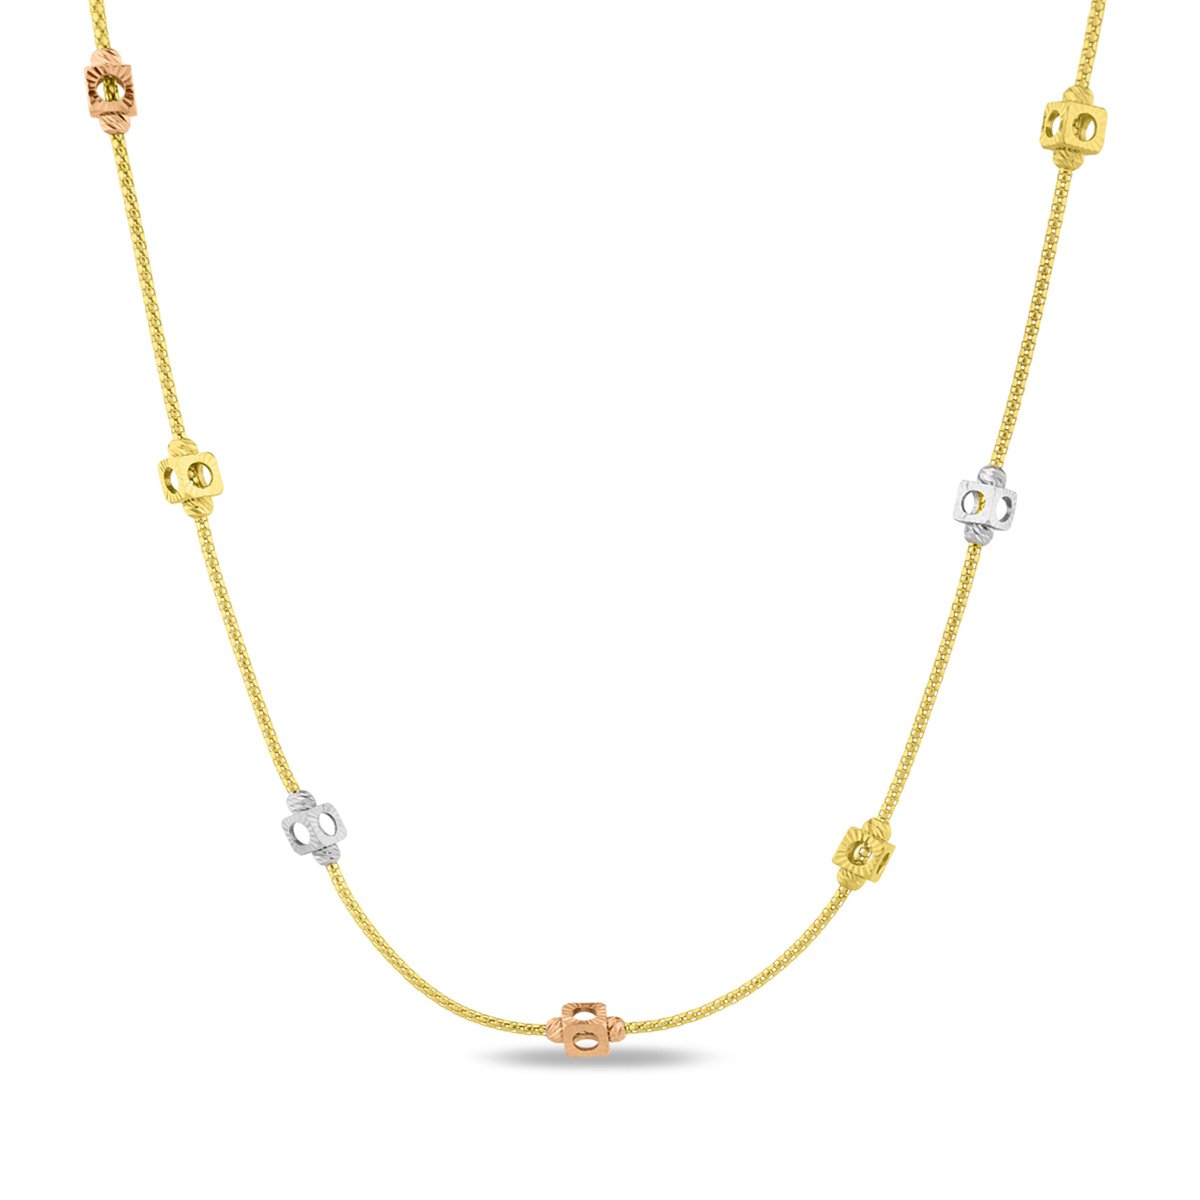 TSM is 7.70G 2401 Gold Necklace